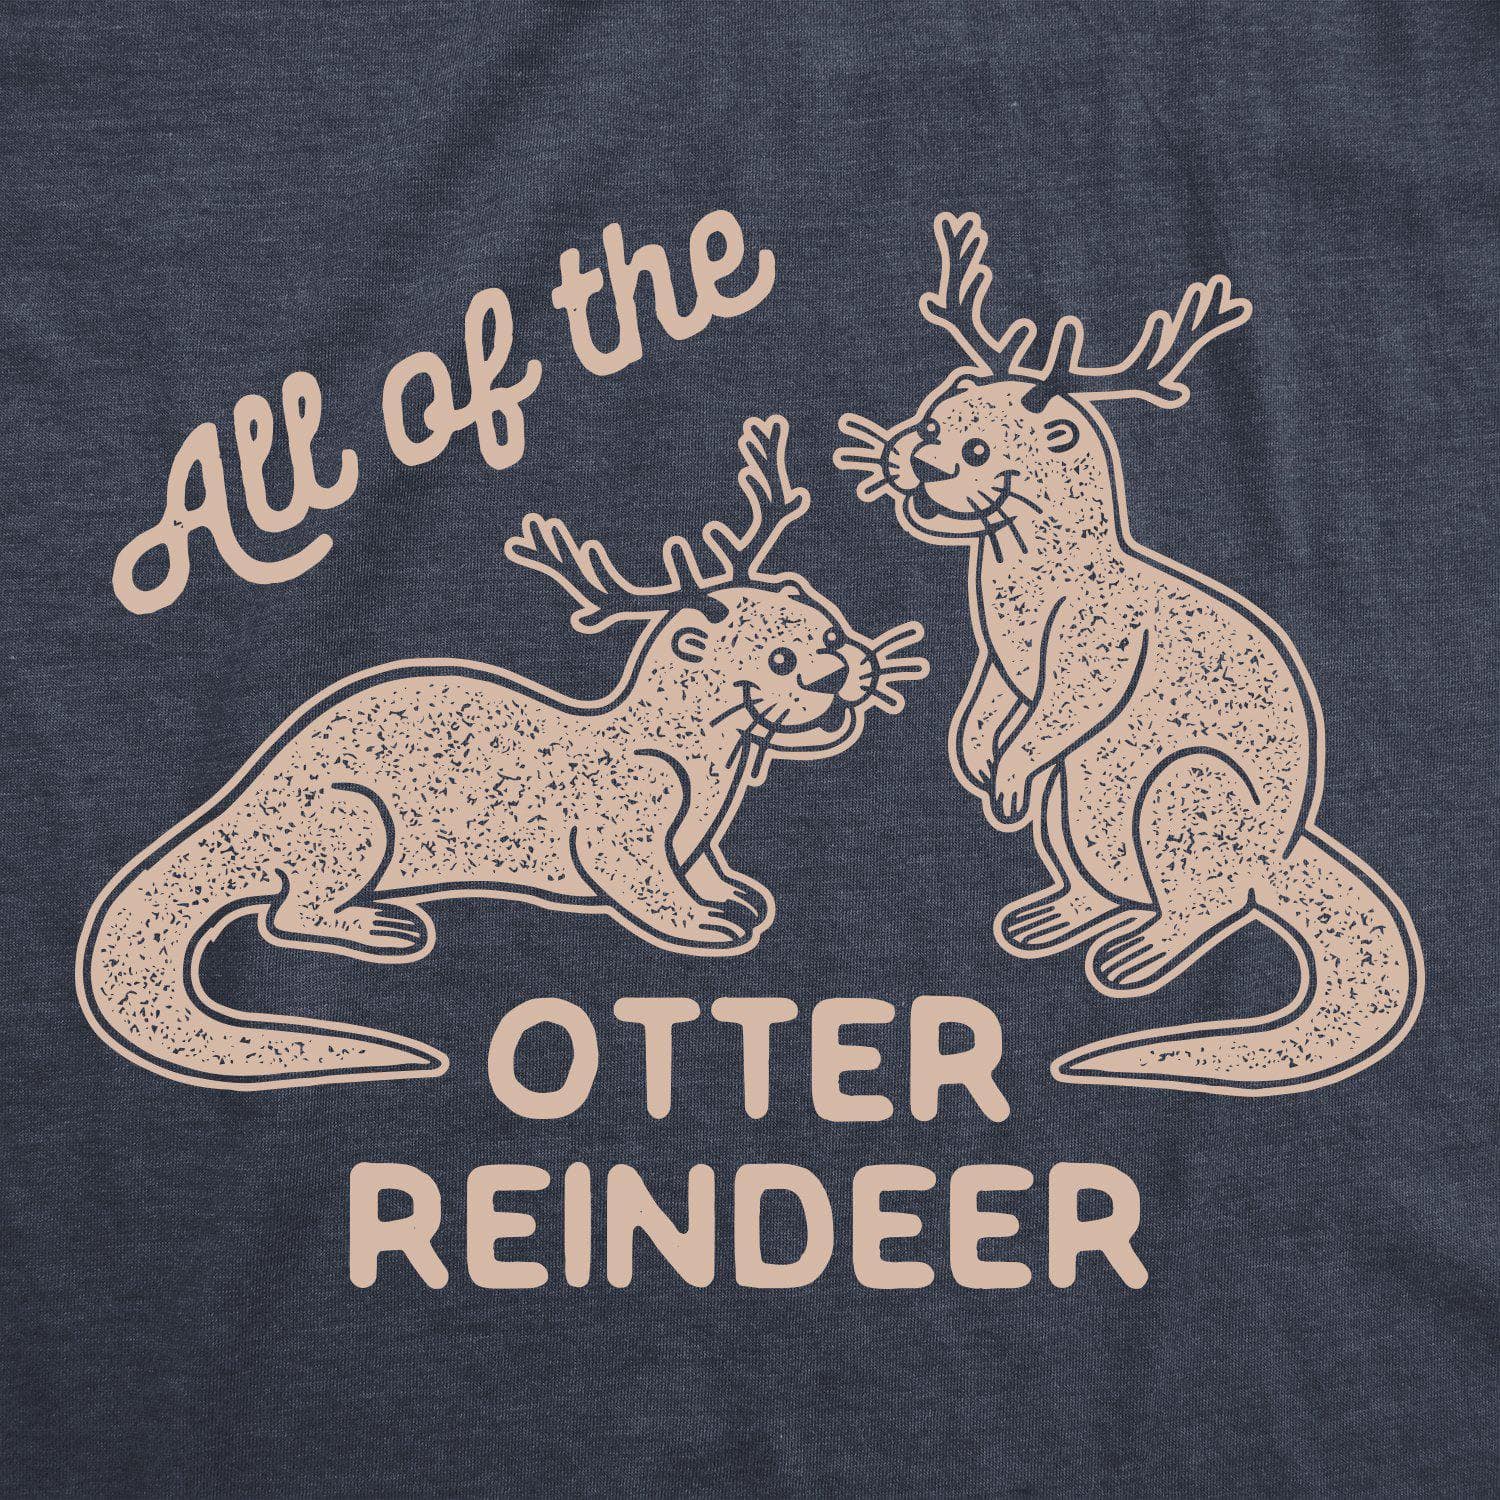 All Of The Otter Reindeer Women's Tshirt - Crazy Dog T-Shirts